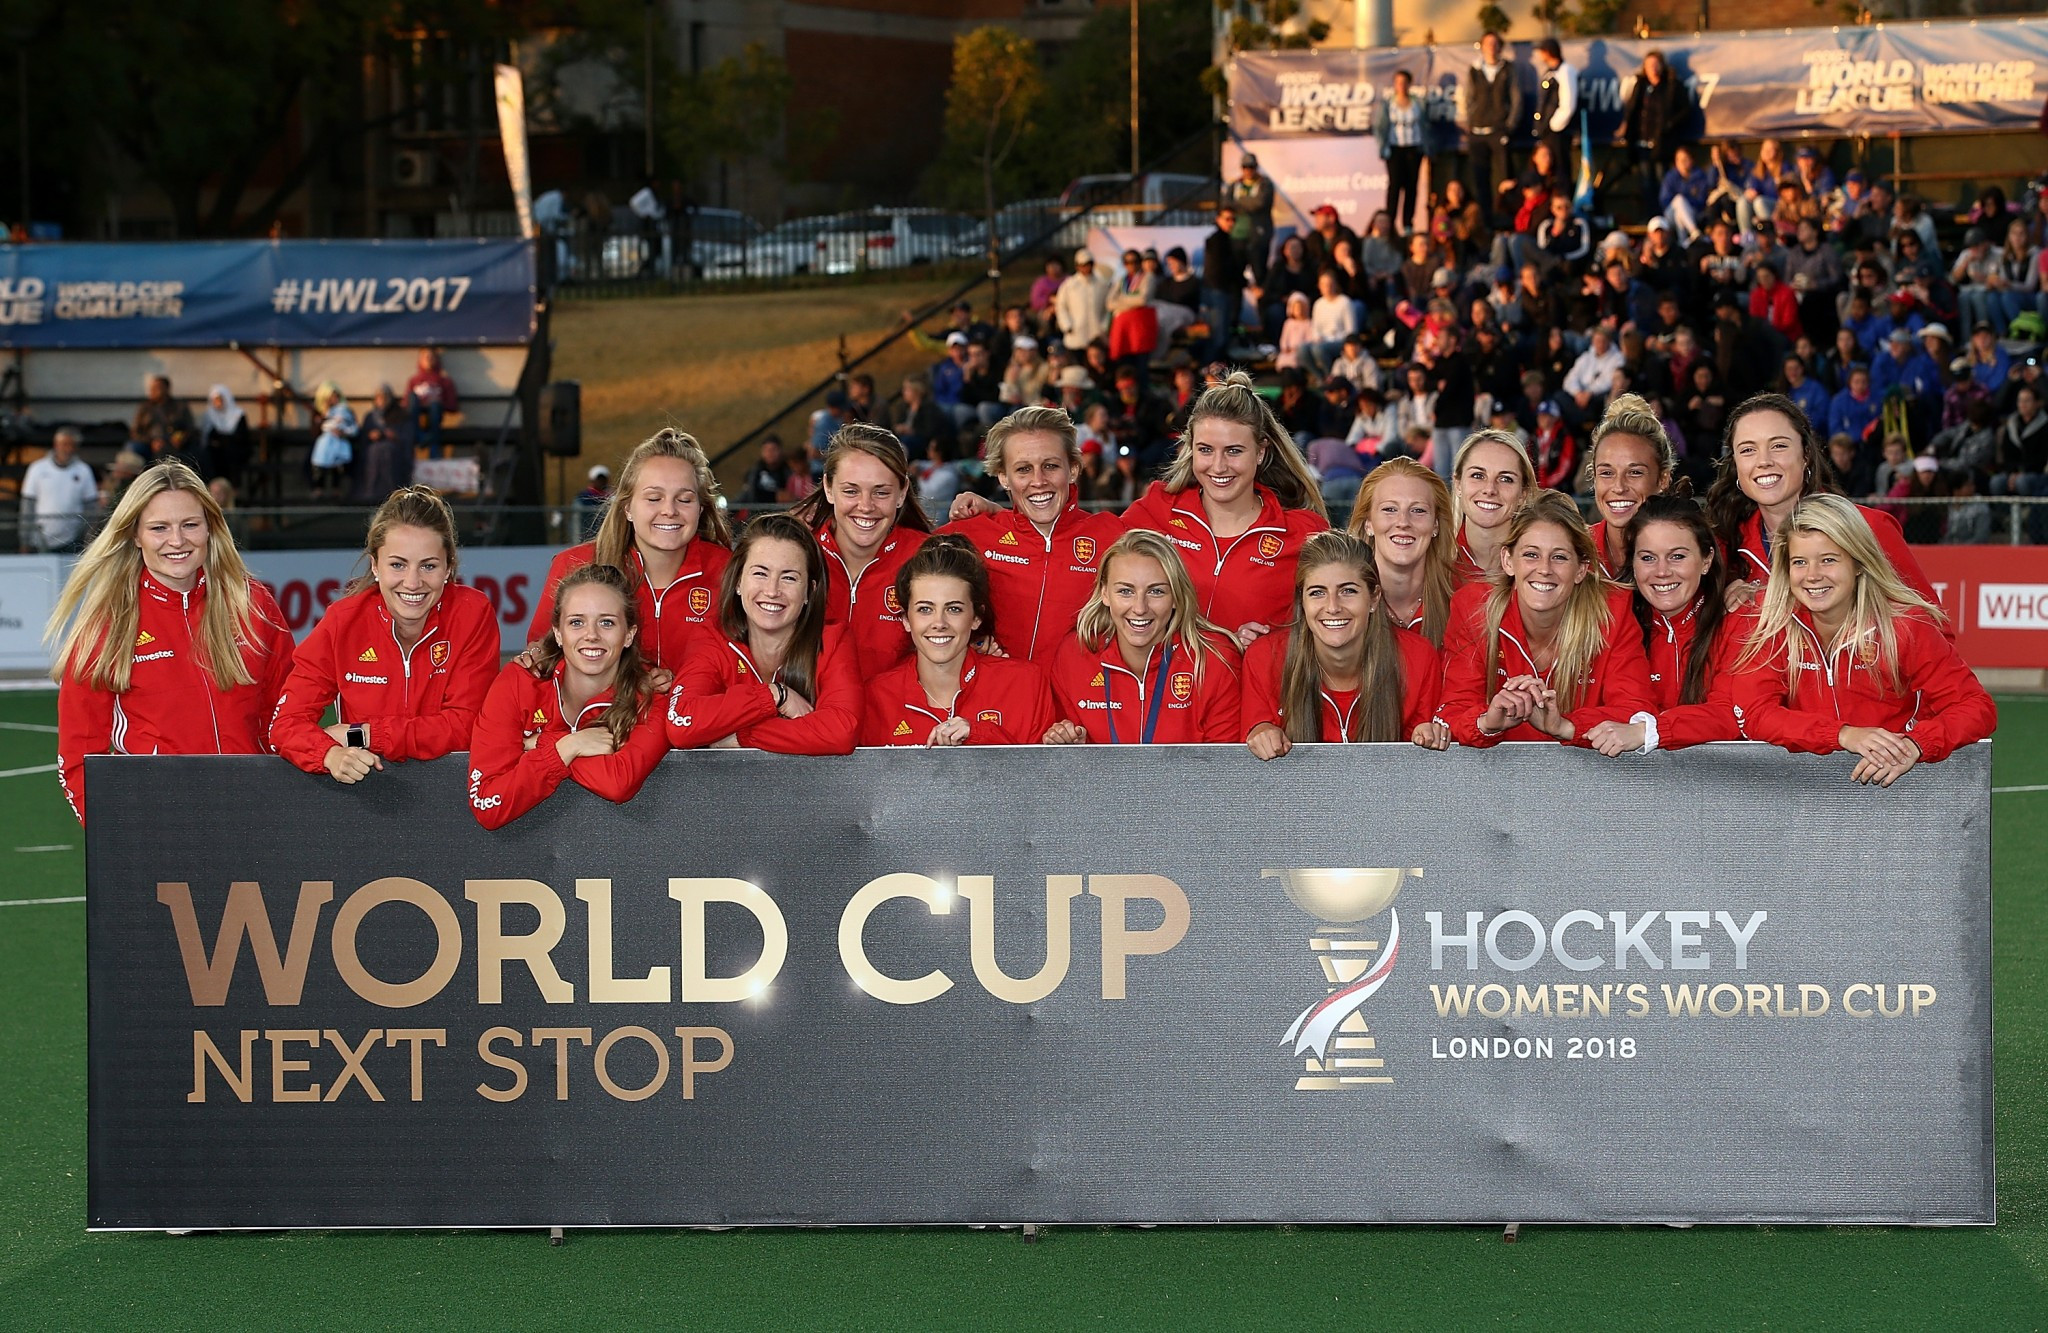 Tickets for England's matches at the Hockey World Cup have been limited to six per person ©Getty Images